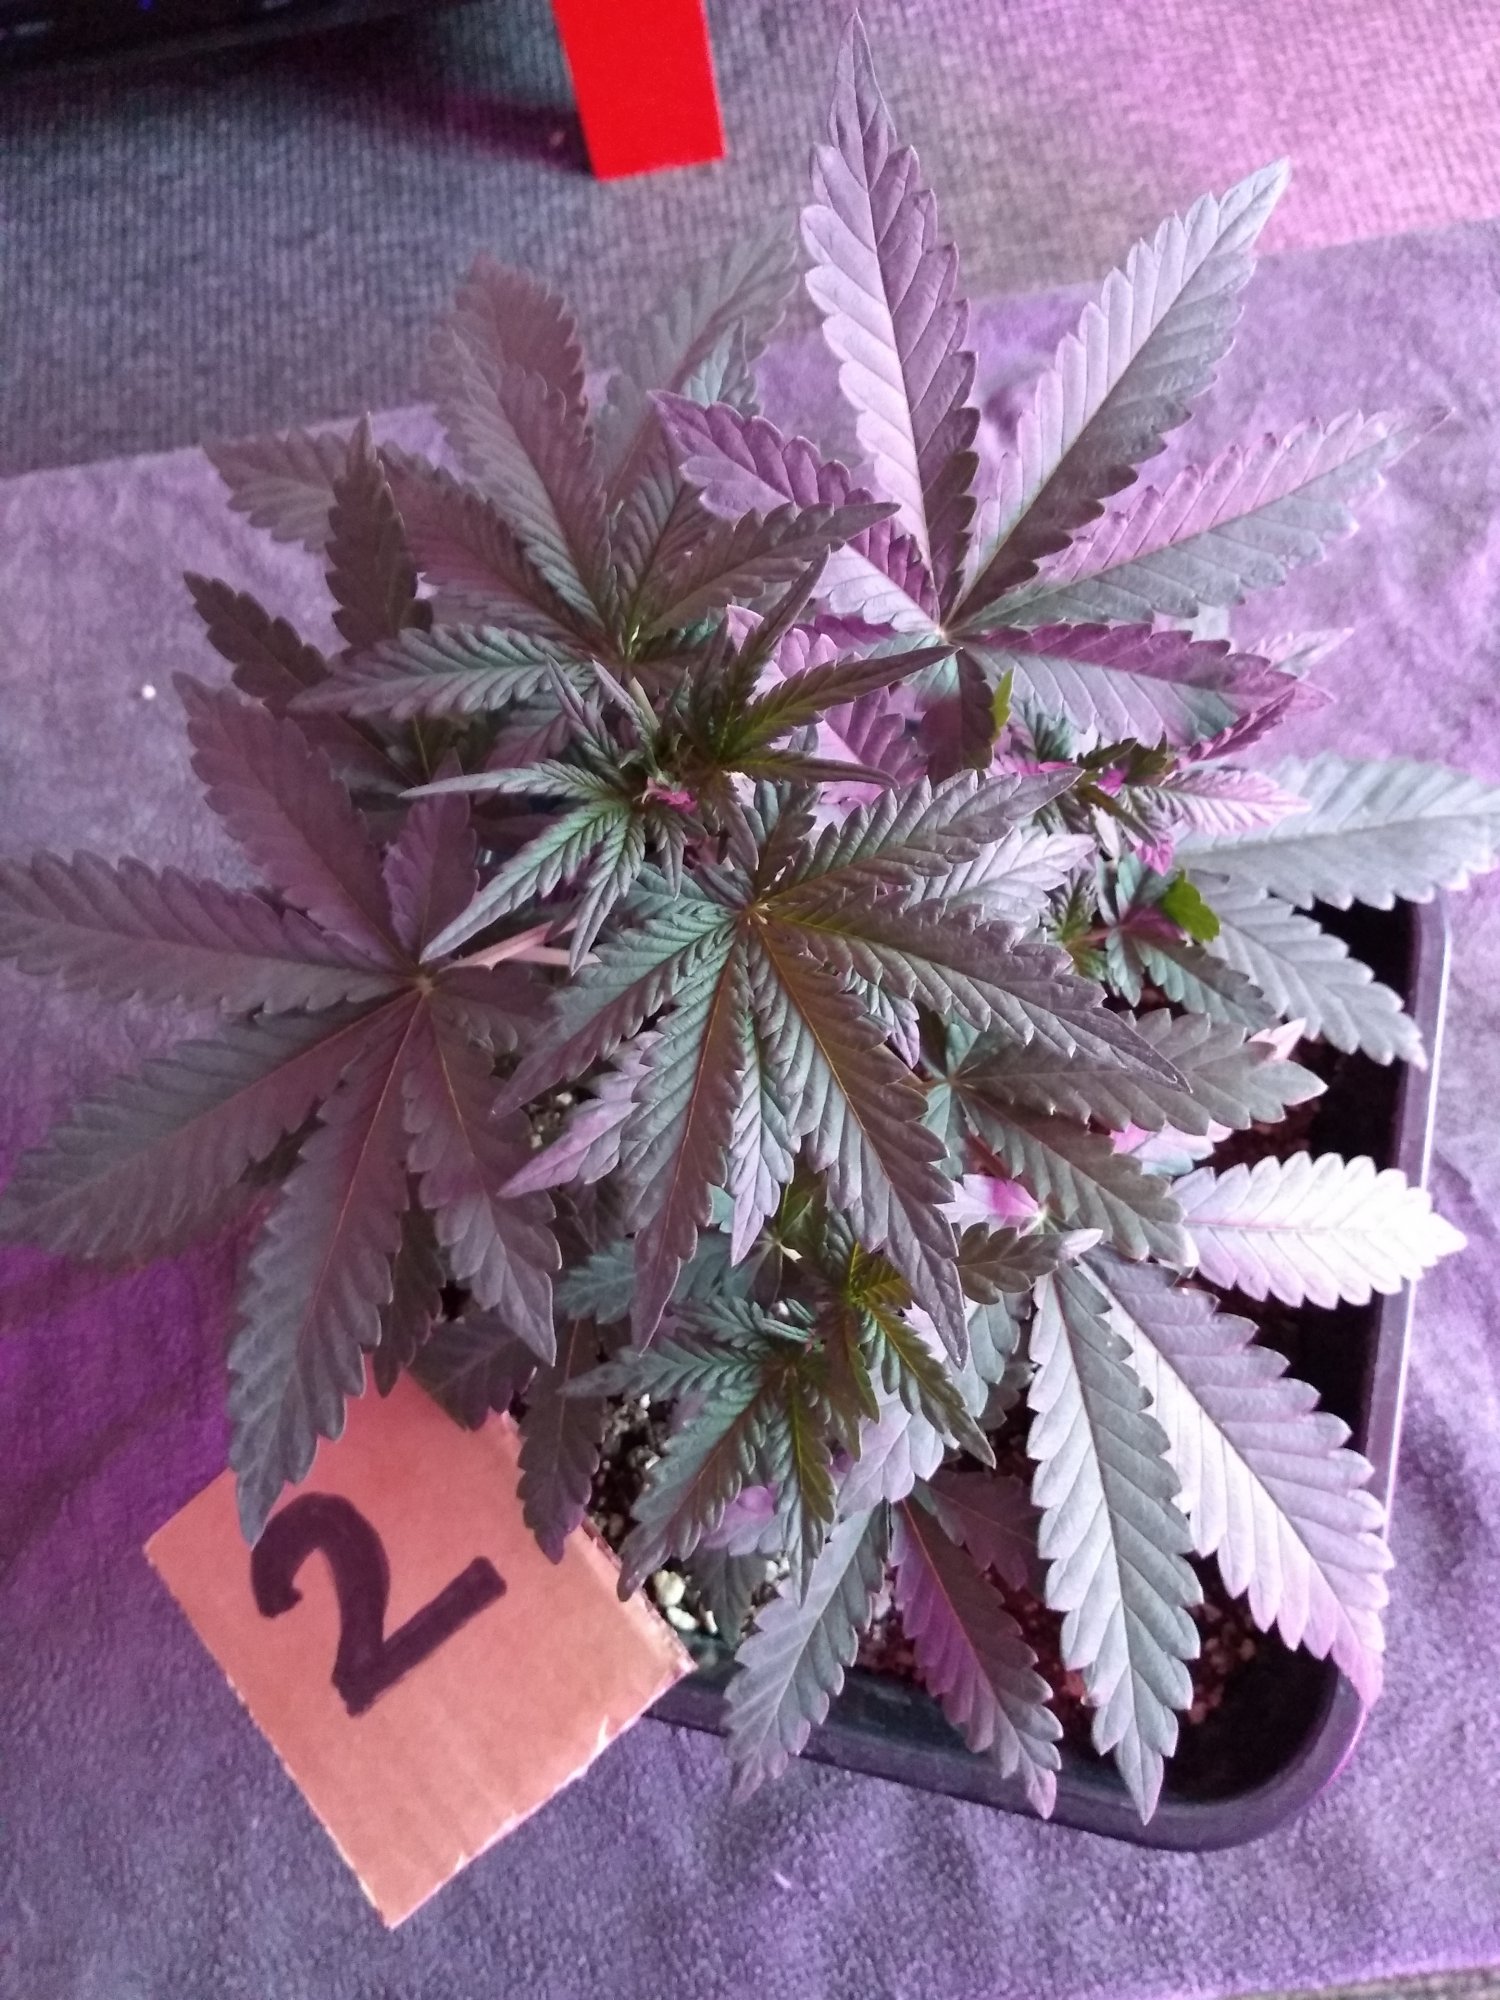 New grower   mistakes have been made 14